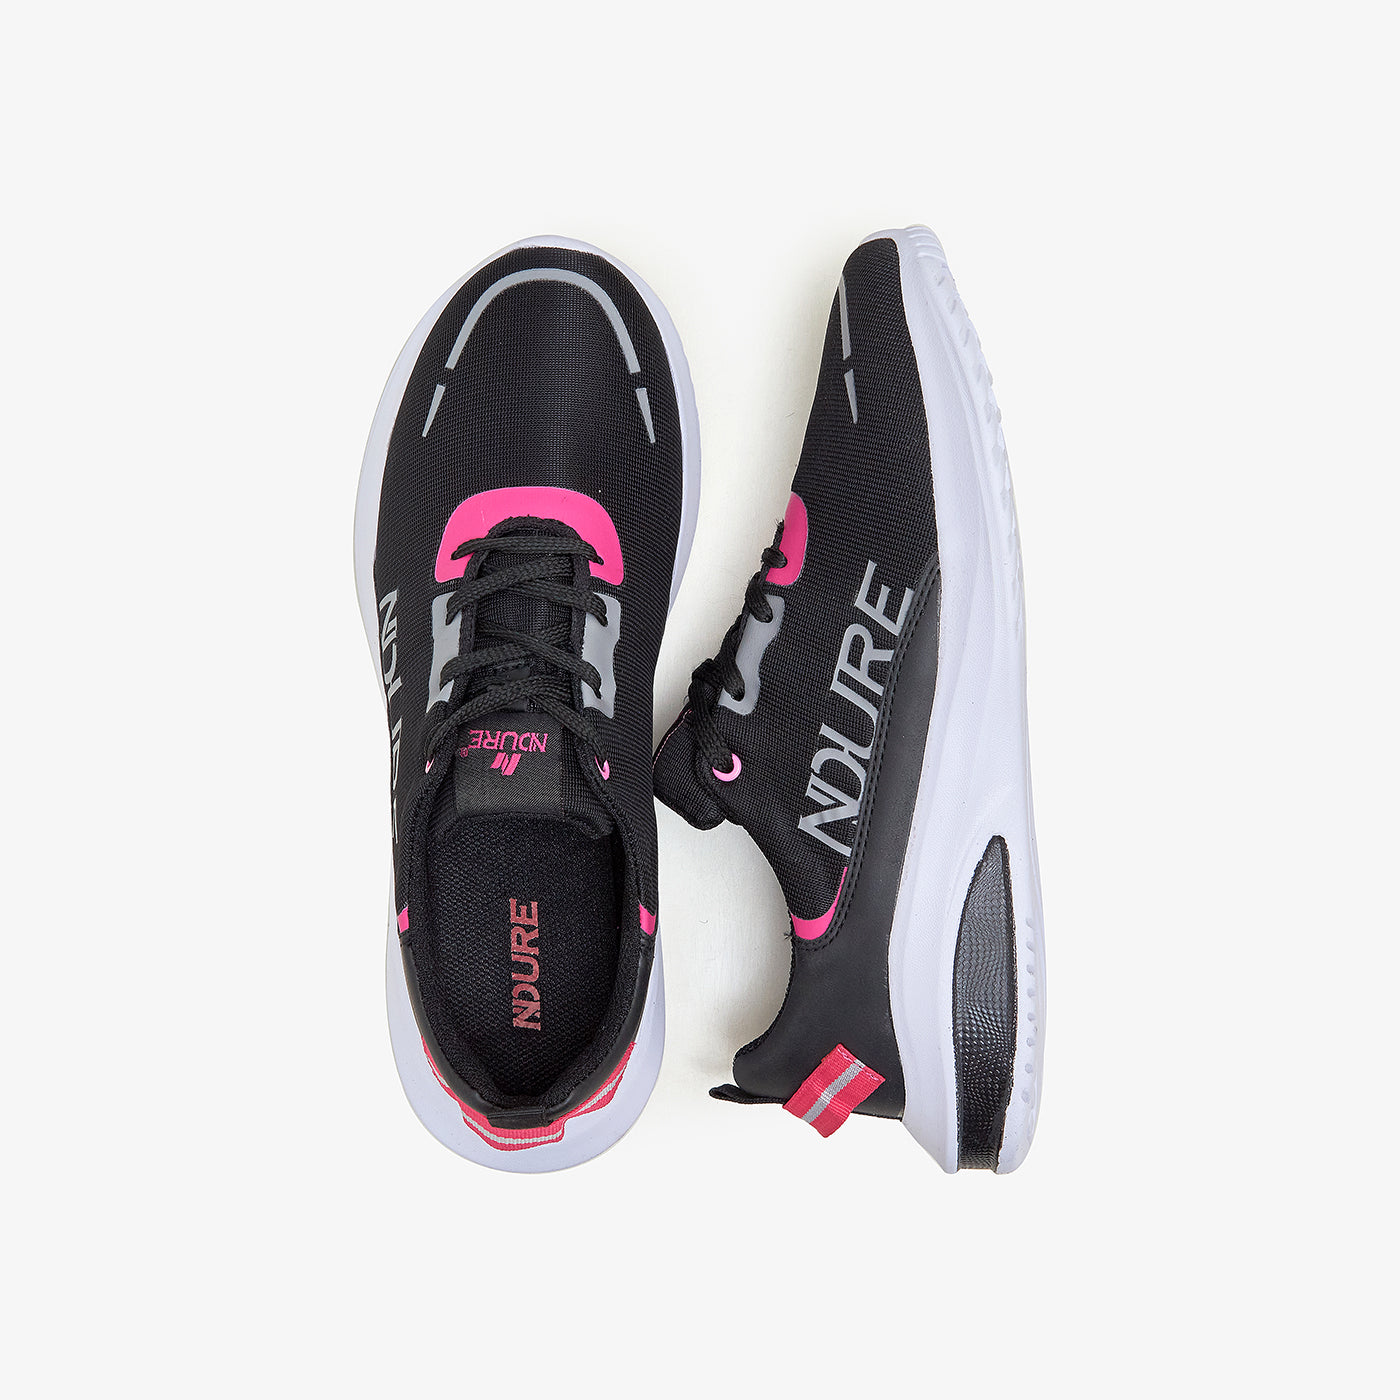 Retro Trainers for Women